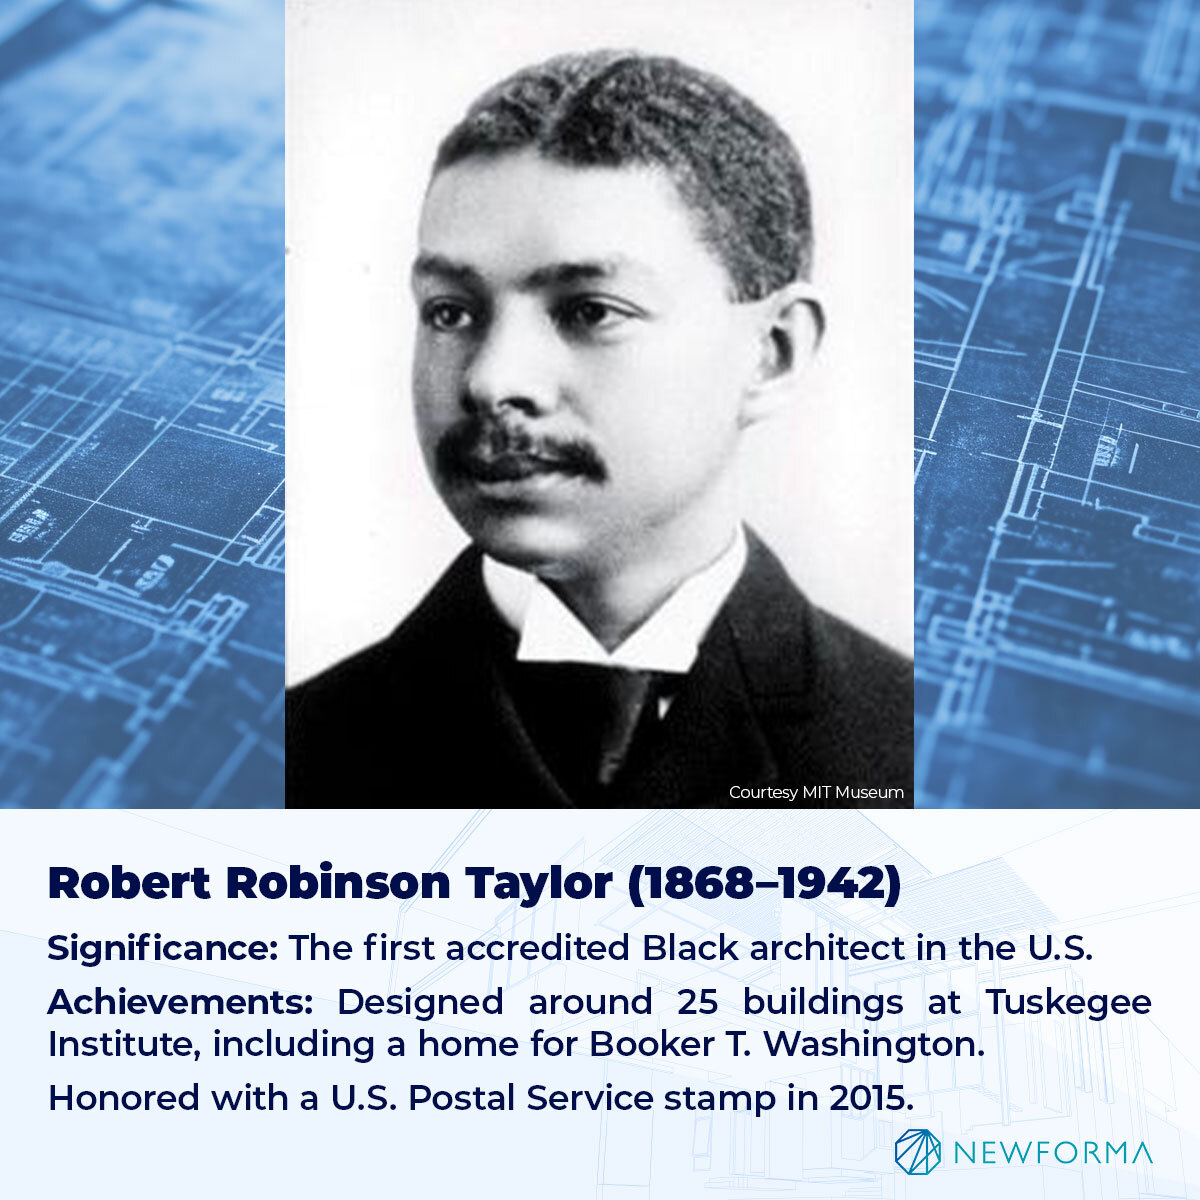 SIGNIFICANCE: THE FIRST ACCREDITED BLACK ARCHITECT IN THE U.S. ACHIEVEMENTS: DESIGNED AROUND 25 BUILDINGS AT TUSKEGEE INSTITUTE, INCLUDING A HOME FOR BOOKER T. WASHINGTON. HONORED WITH A U.S. POSTAL SERVICE STAMP IN 2015. 